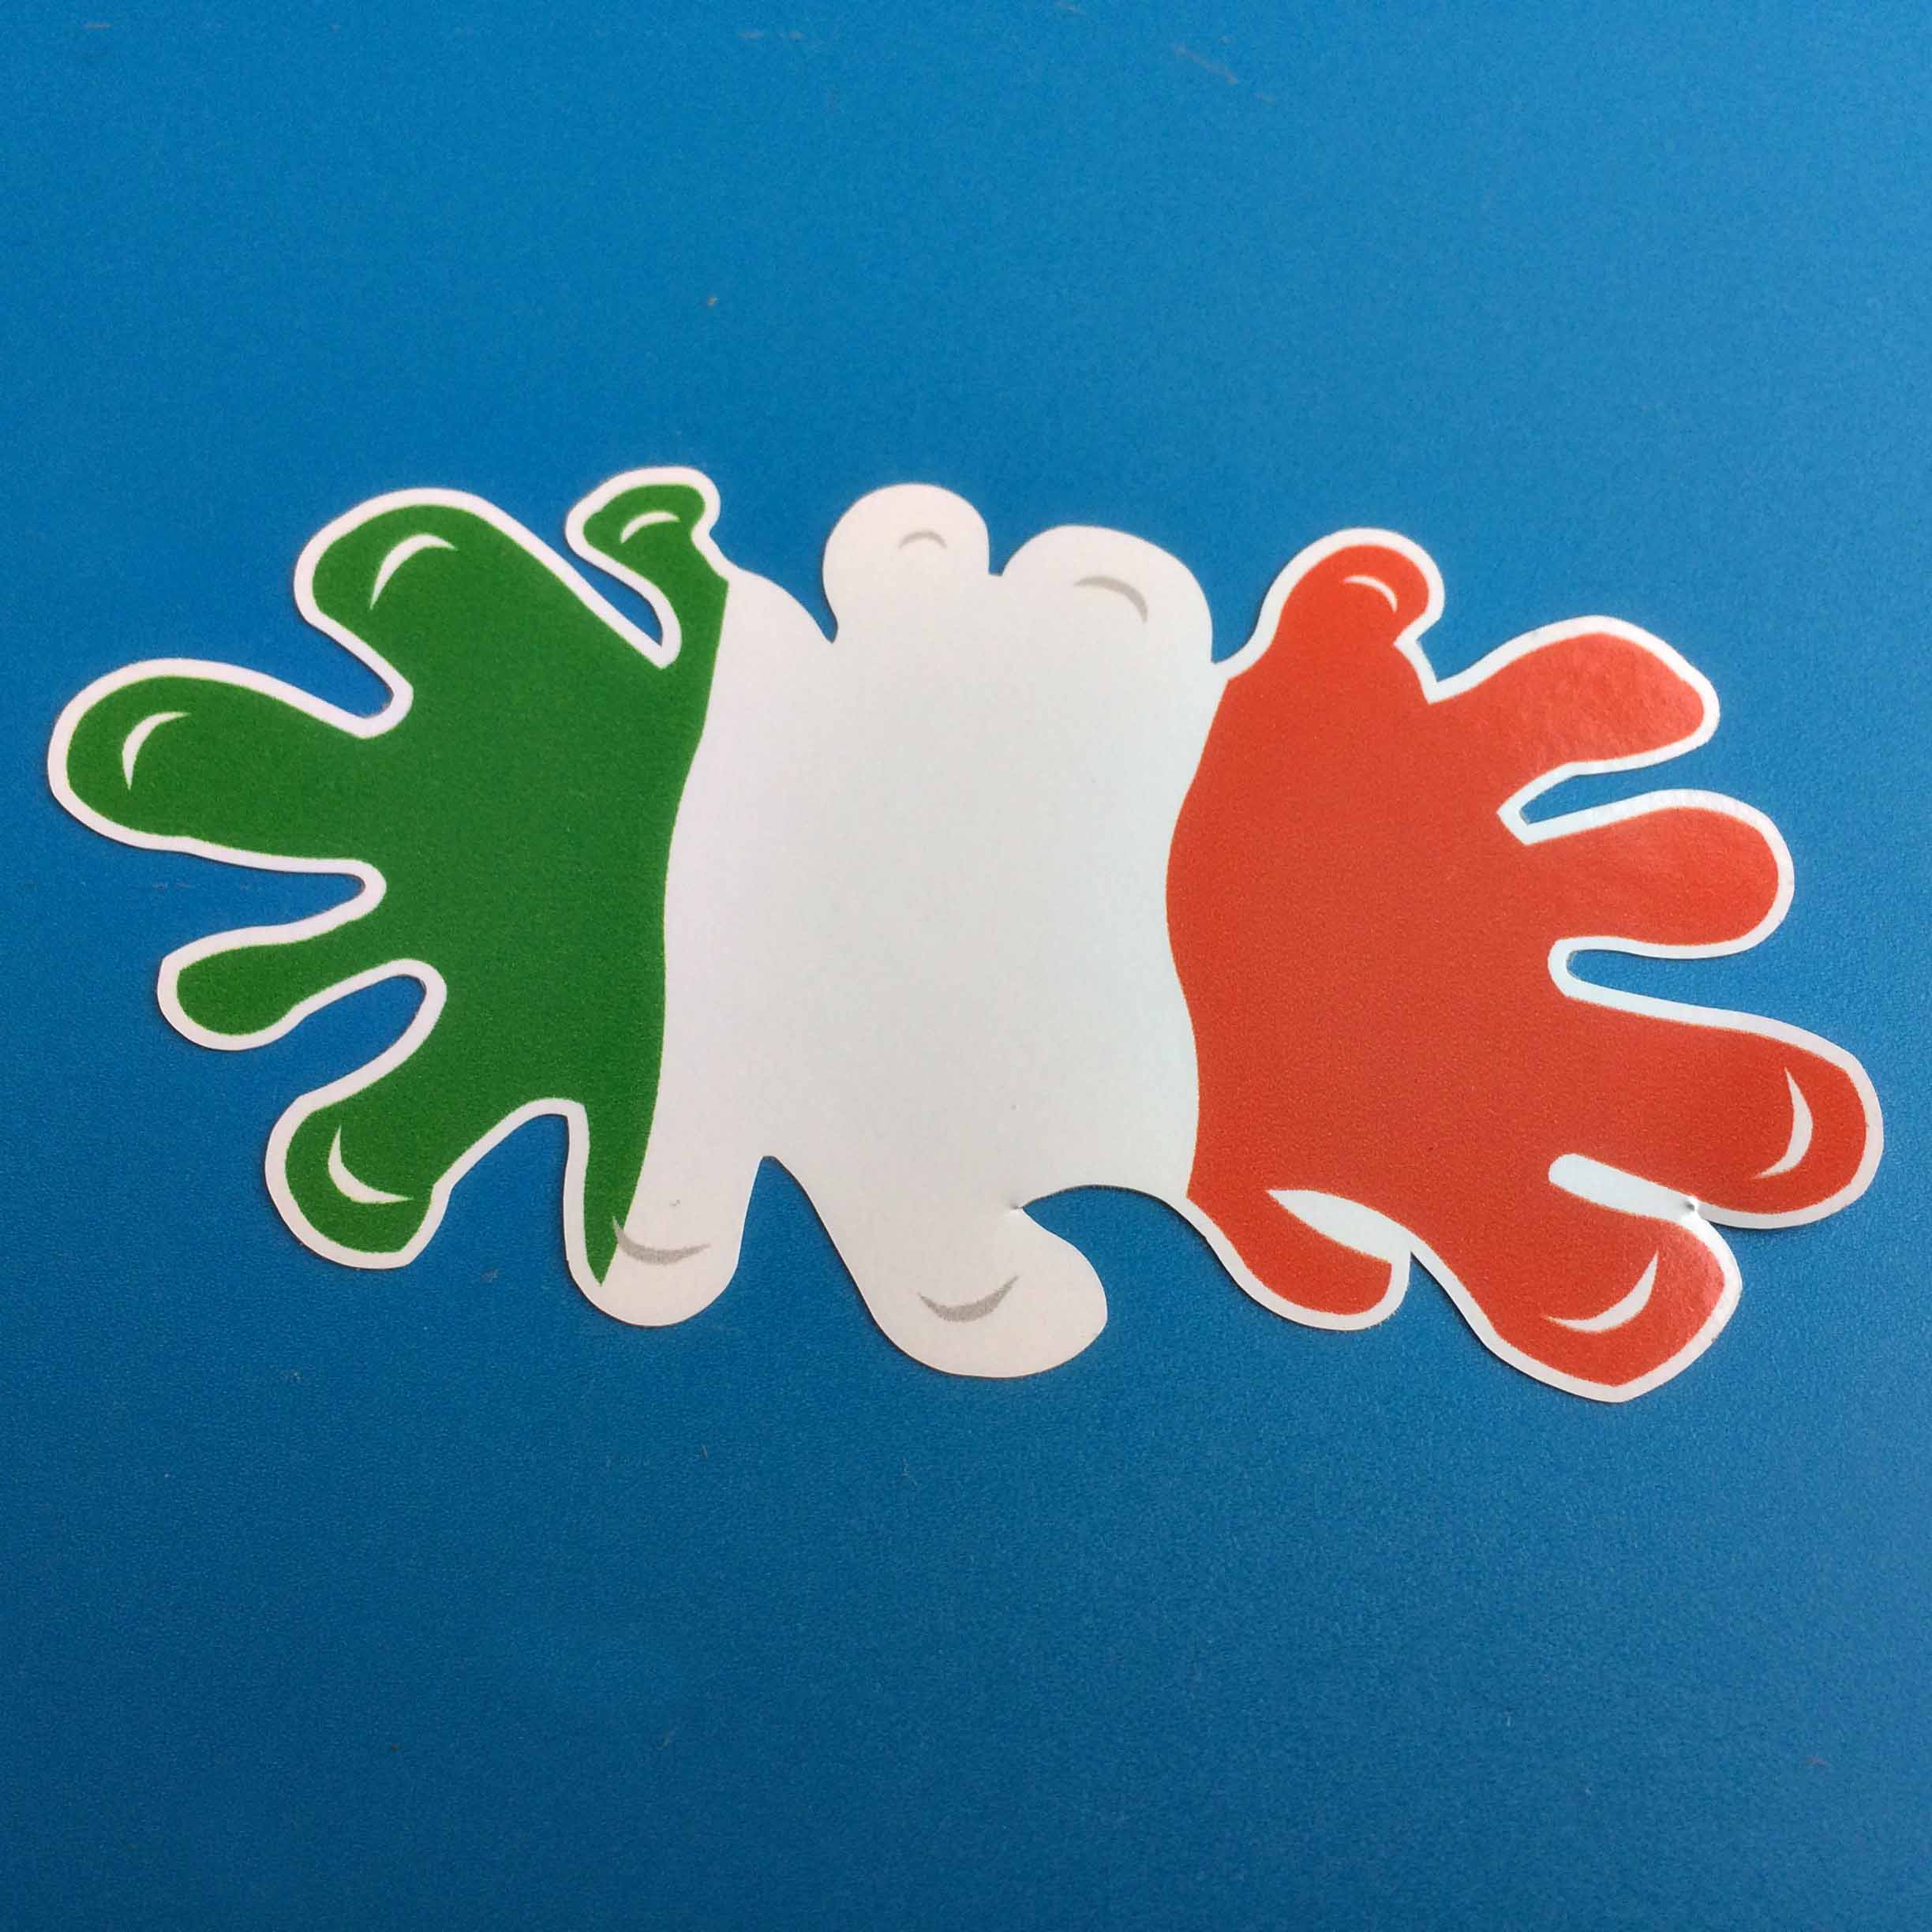 ITALY/ITALIAN FLAG SPLAT STICKERS. The green, white and red flag of Italy as a splatter of paint.